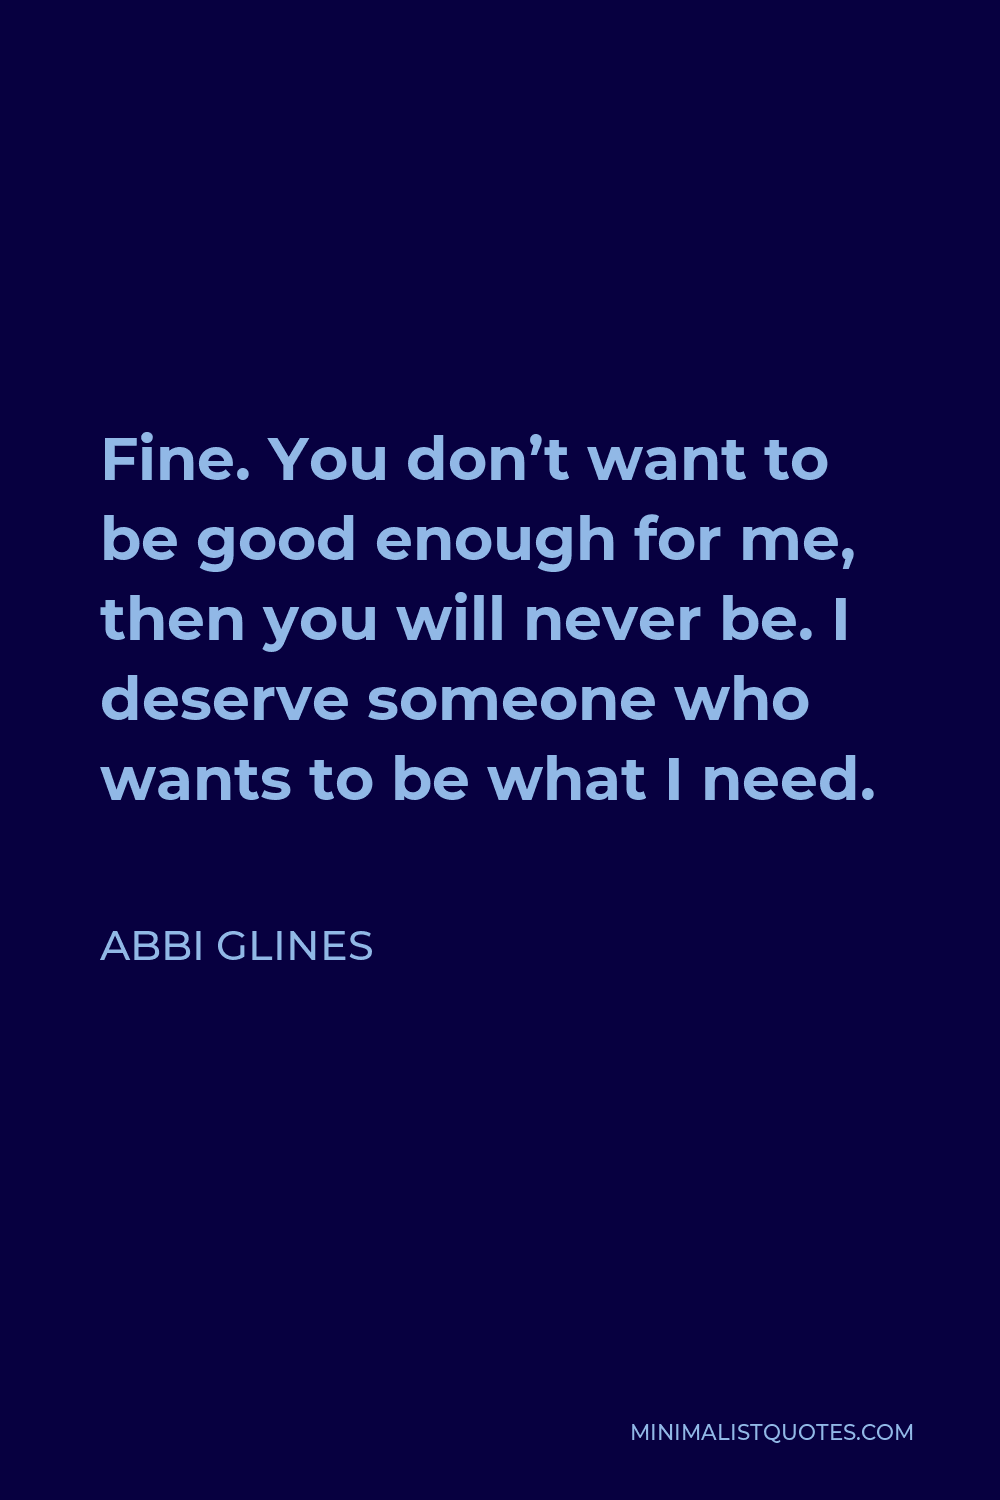 Abbi Glines Quote - Fine. You don’t want to be good enough for me, then you will never be. I deserve someone who wants to be what I need.